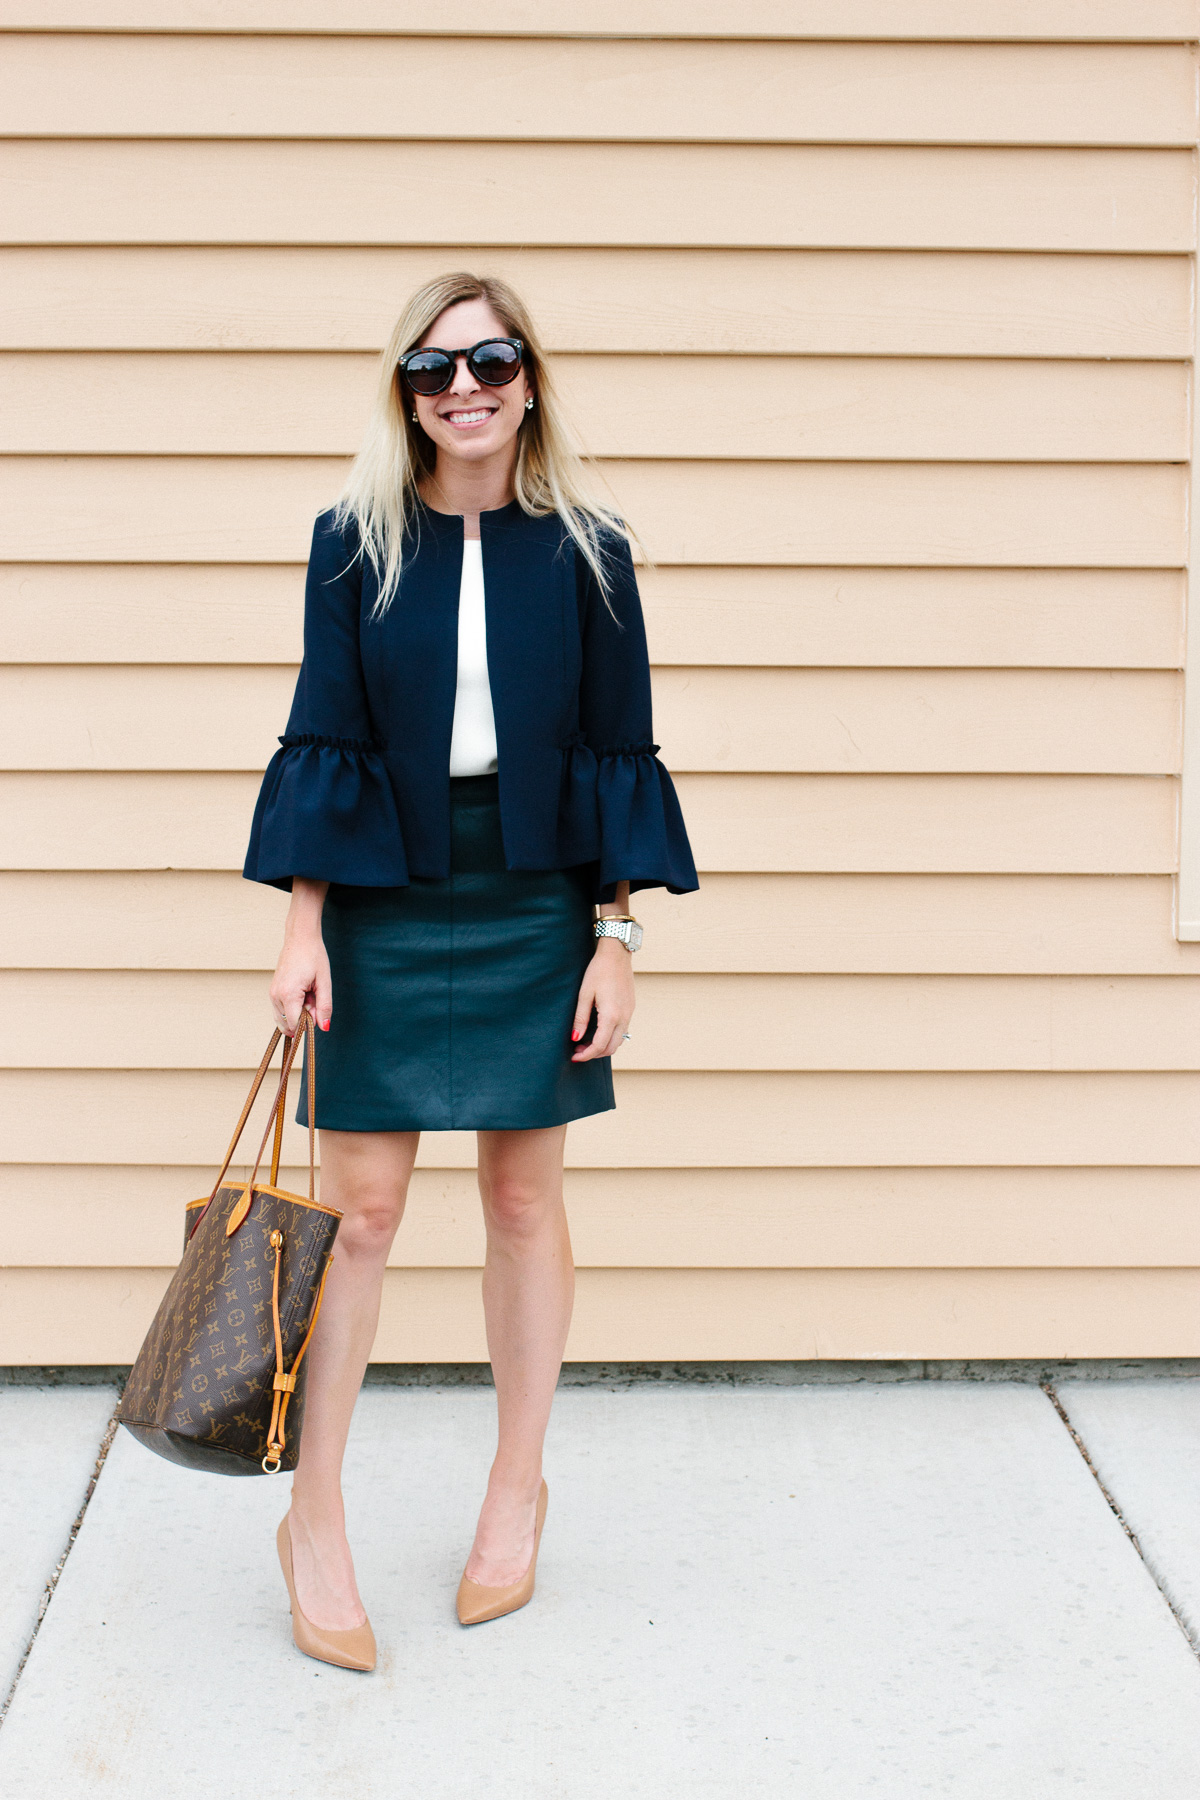 How to Style a Faux Leather Skirt for Work